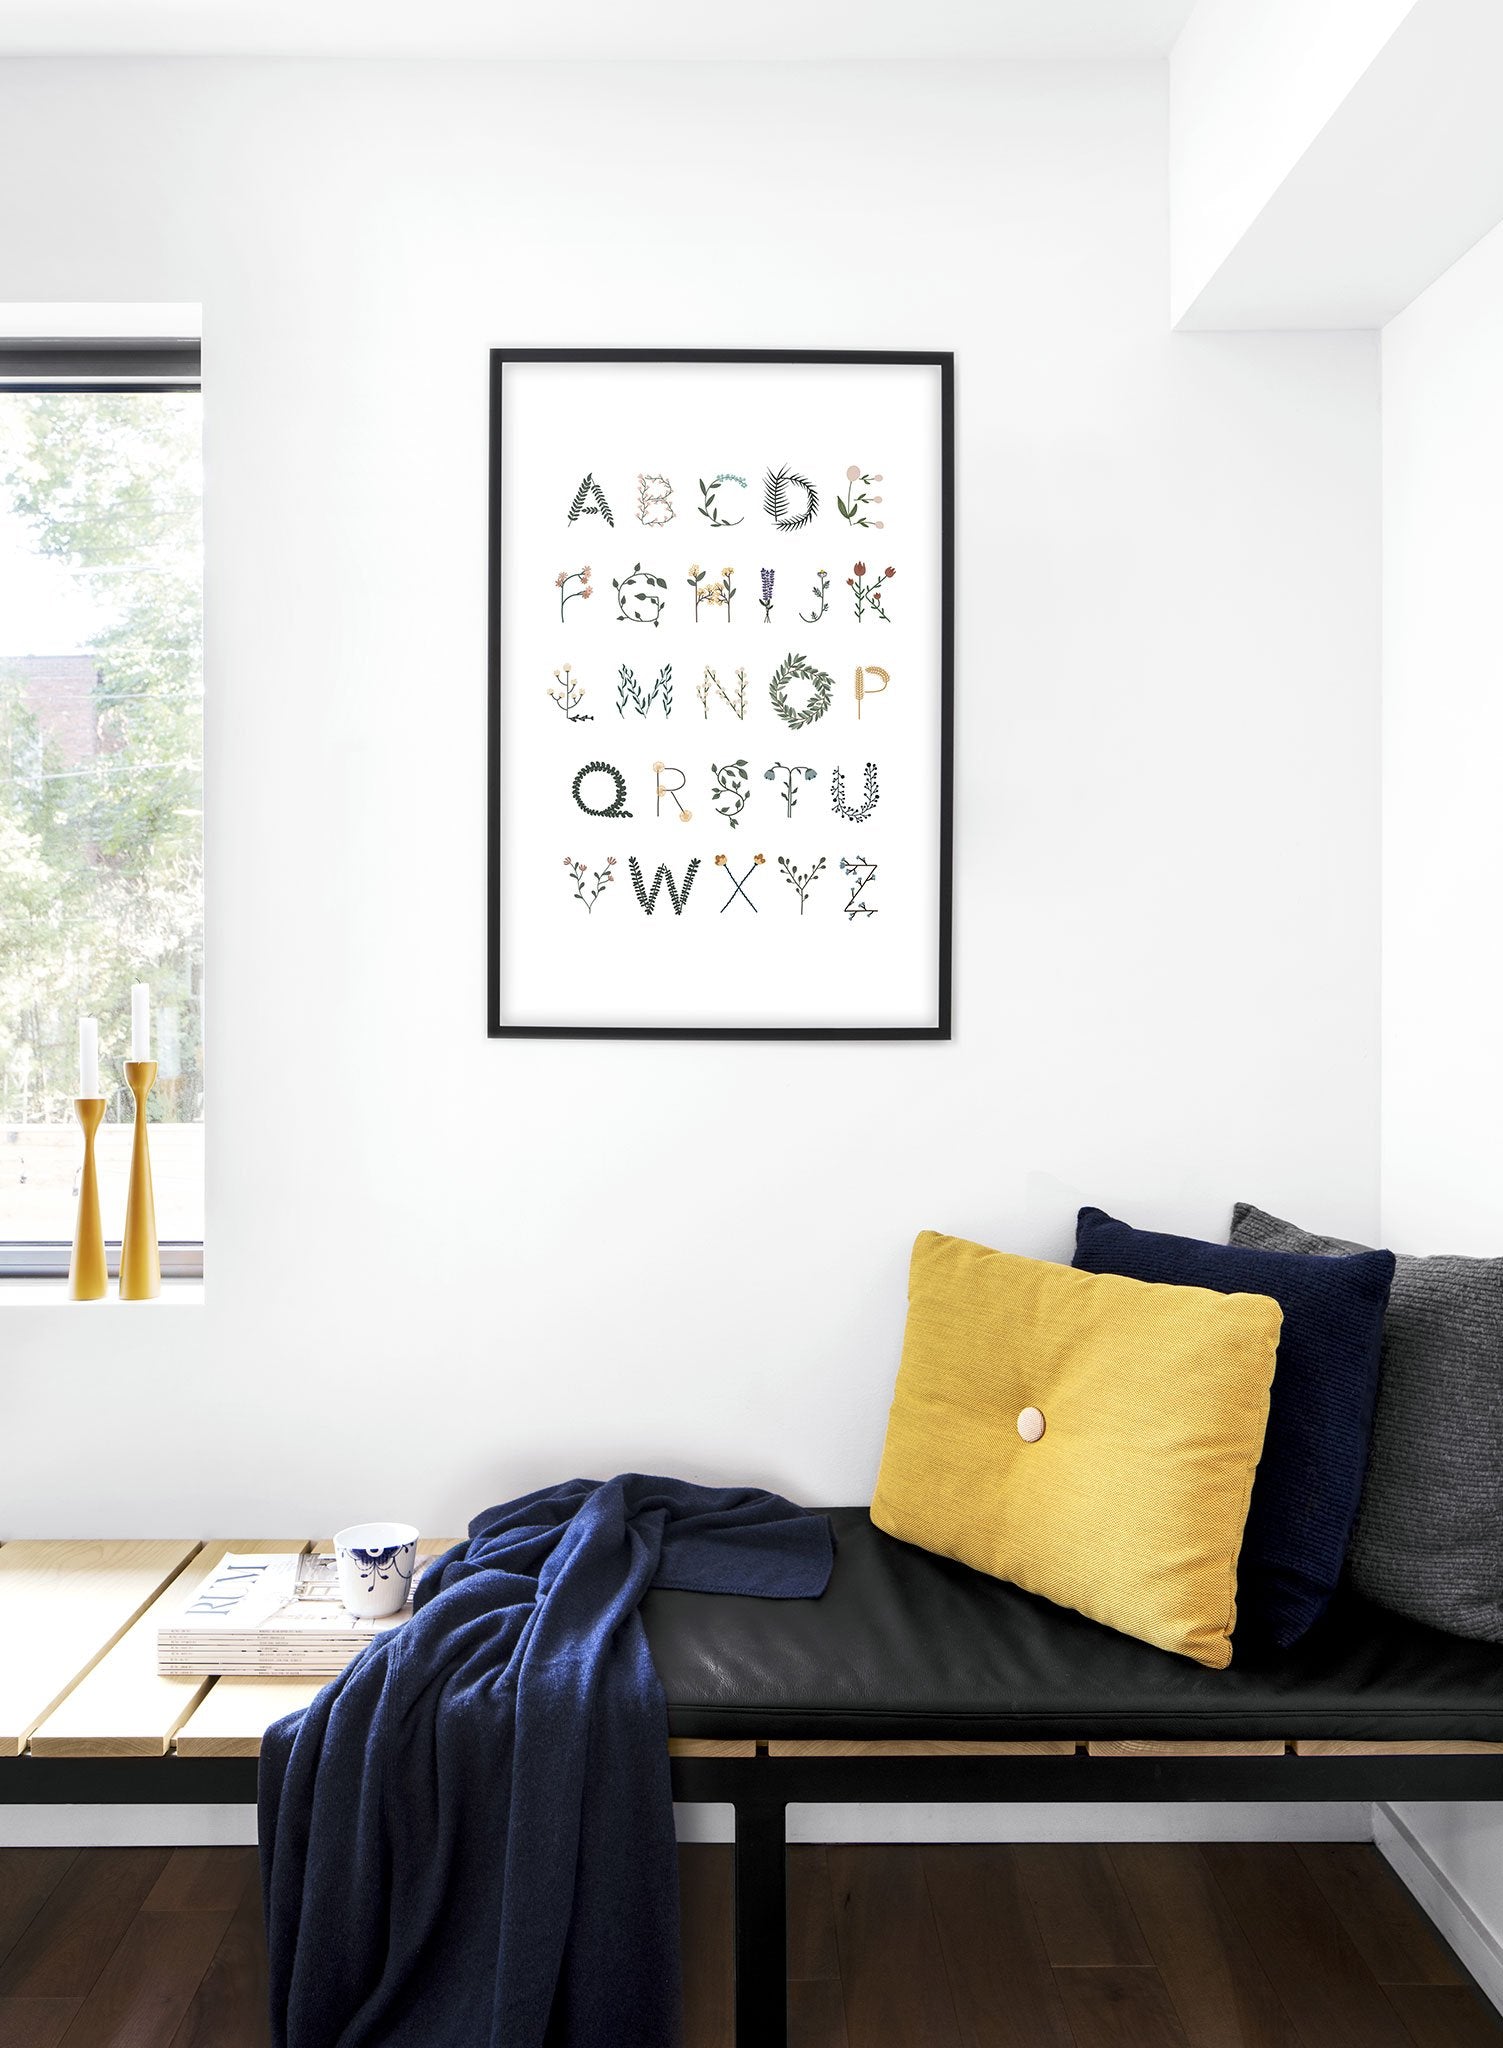 Modern minimalist typography poster by Opposite Wall with Alphabet in Flowers - Lifestyle - Bedroom